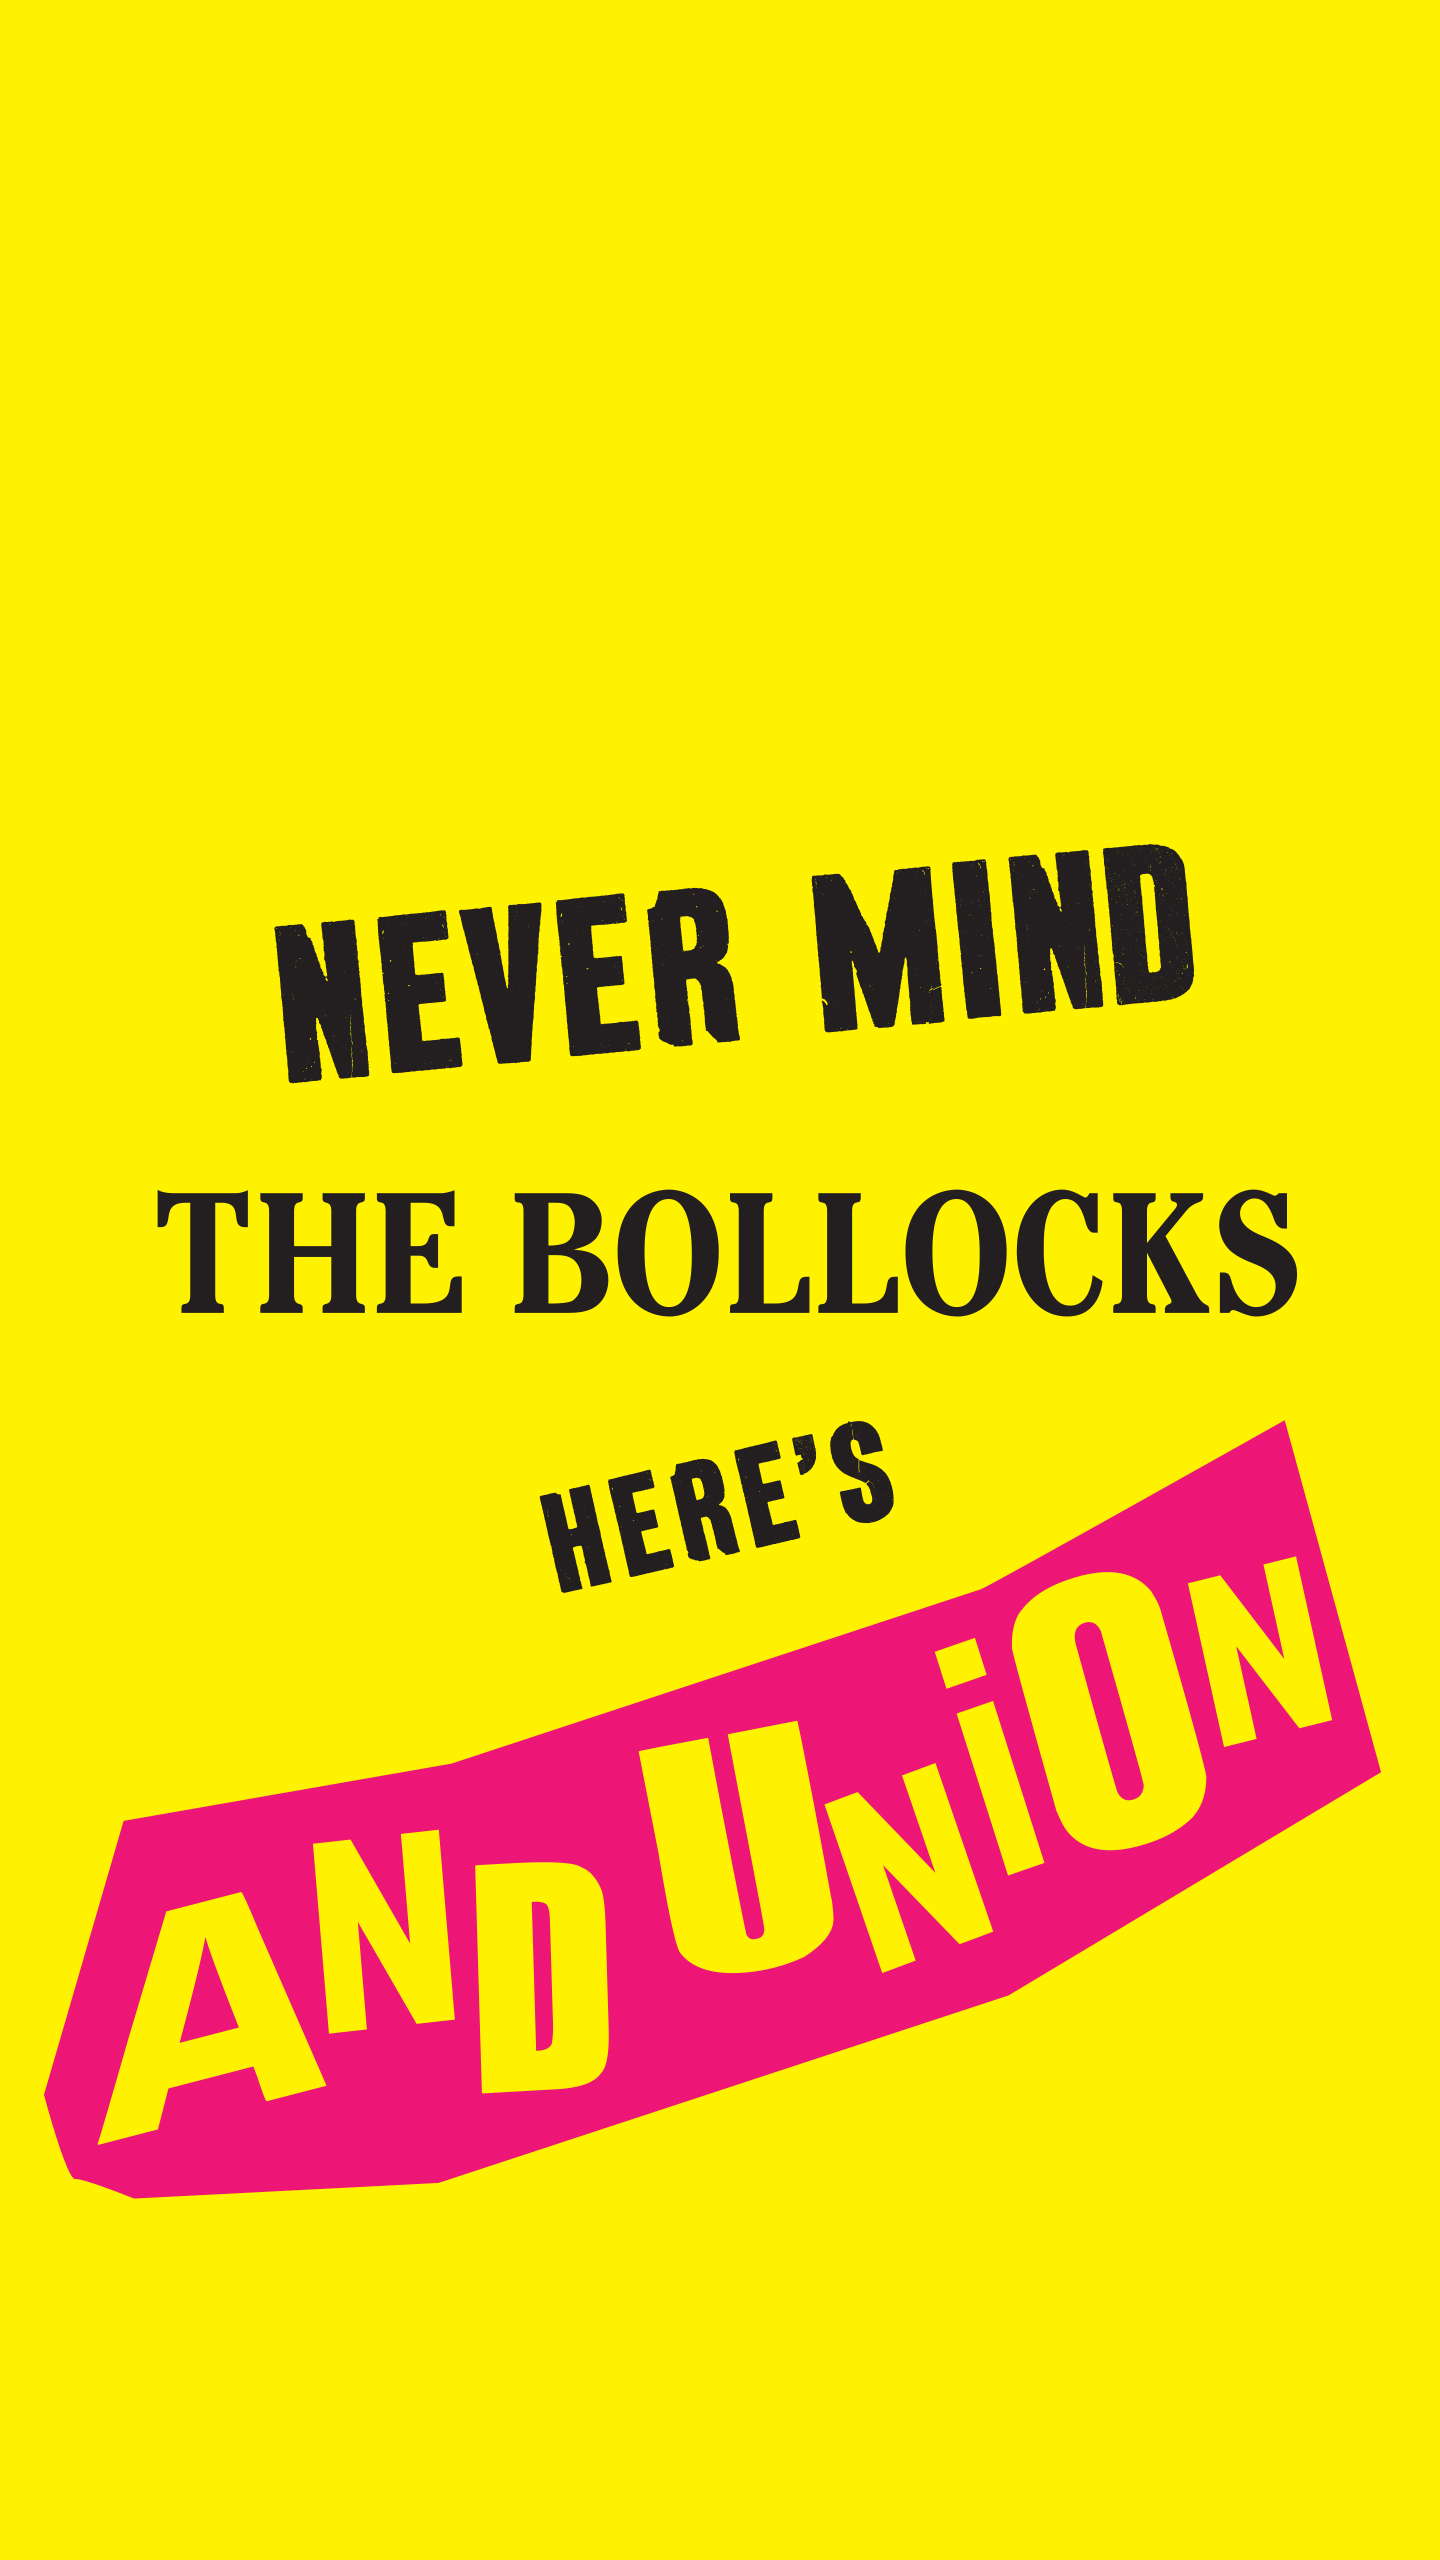 Iphone Wallpaper Here / Android Wallpaper Here - Never Mind The Bollocks Here's , HD Wallpaper & Backgrounds